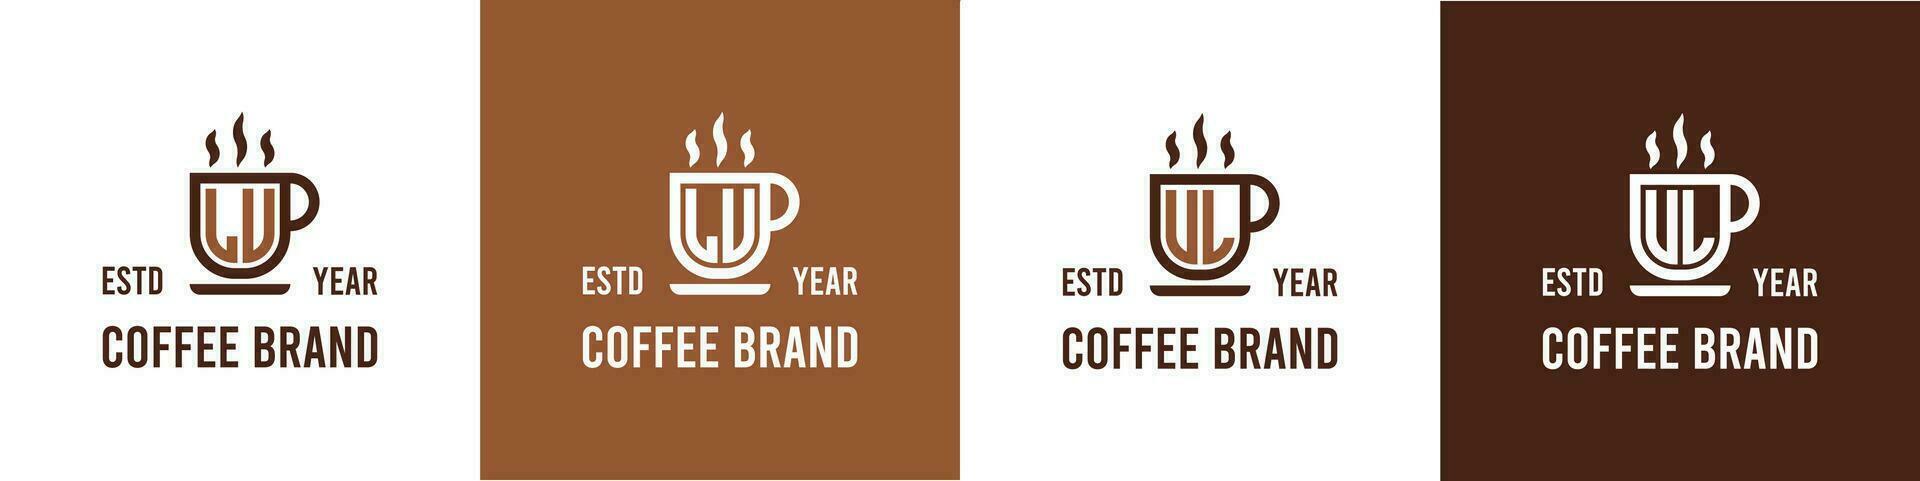 Letter LU and UL Coffee Logo, suitable for any business related to Coffee, Tea, or Other with LU or UL initials. vector